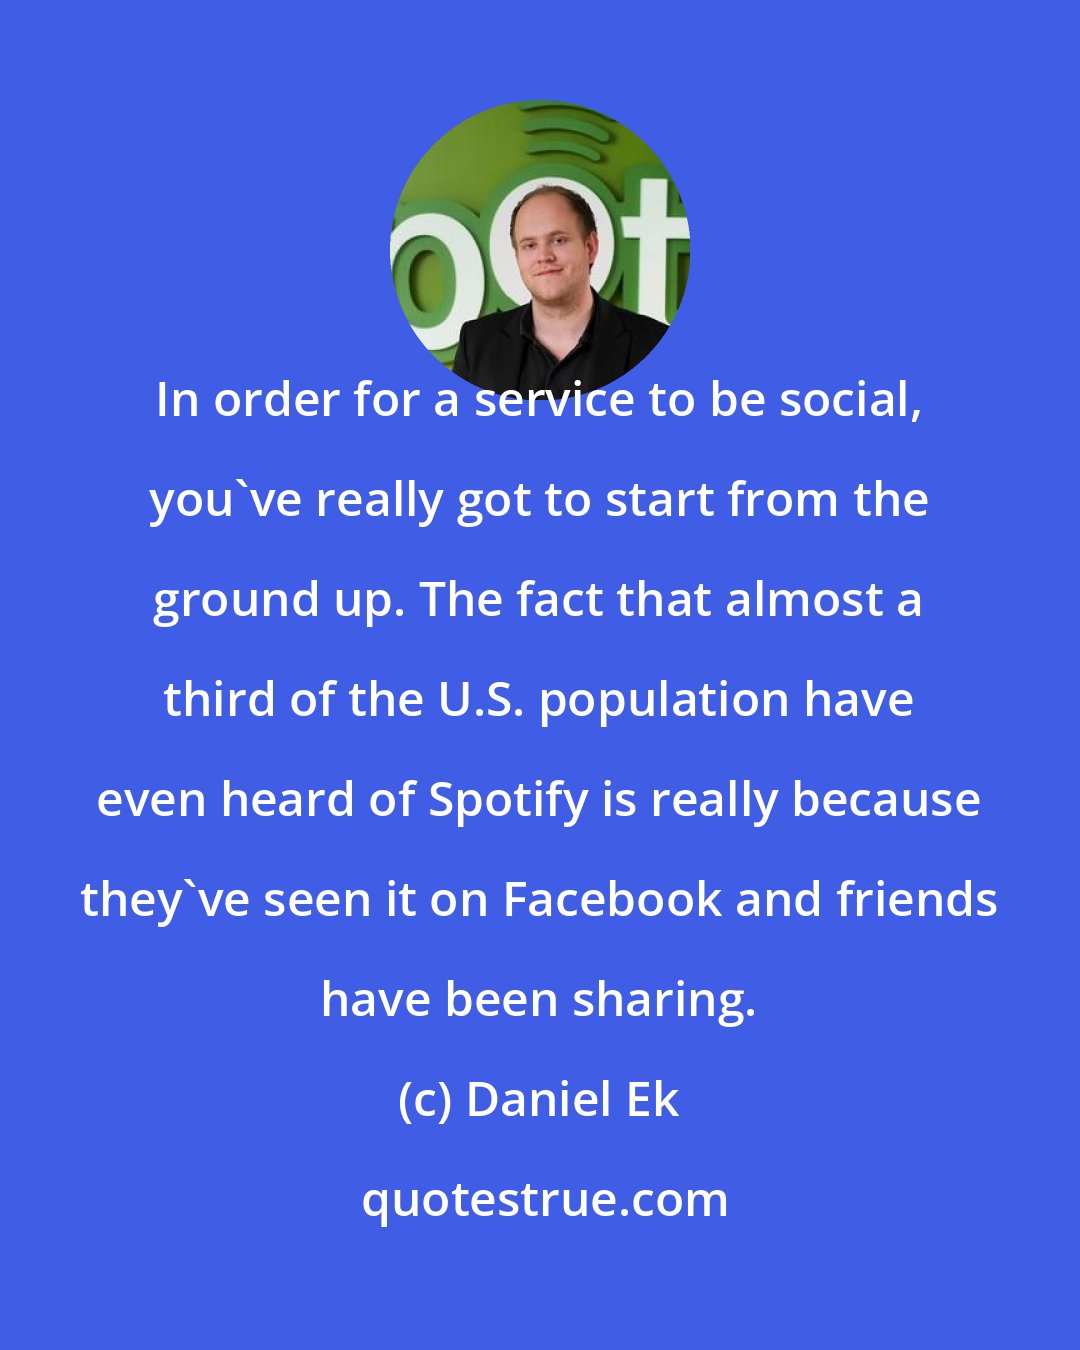 Daniel Ek: In order for a service to be social, you've really got to start from the ground up. The fact that almost a third of the U.S. population have even heard of Spotify is really because they've seen it on Facebook and friends have been sharing.